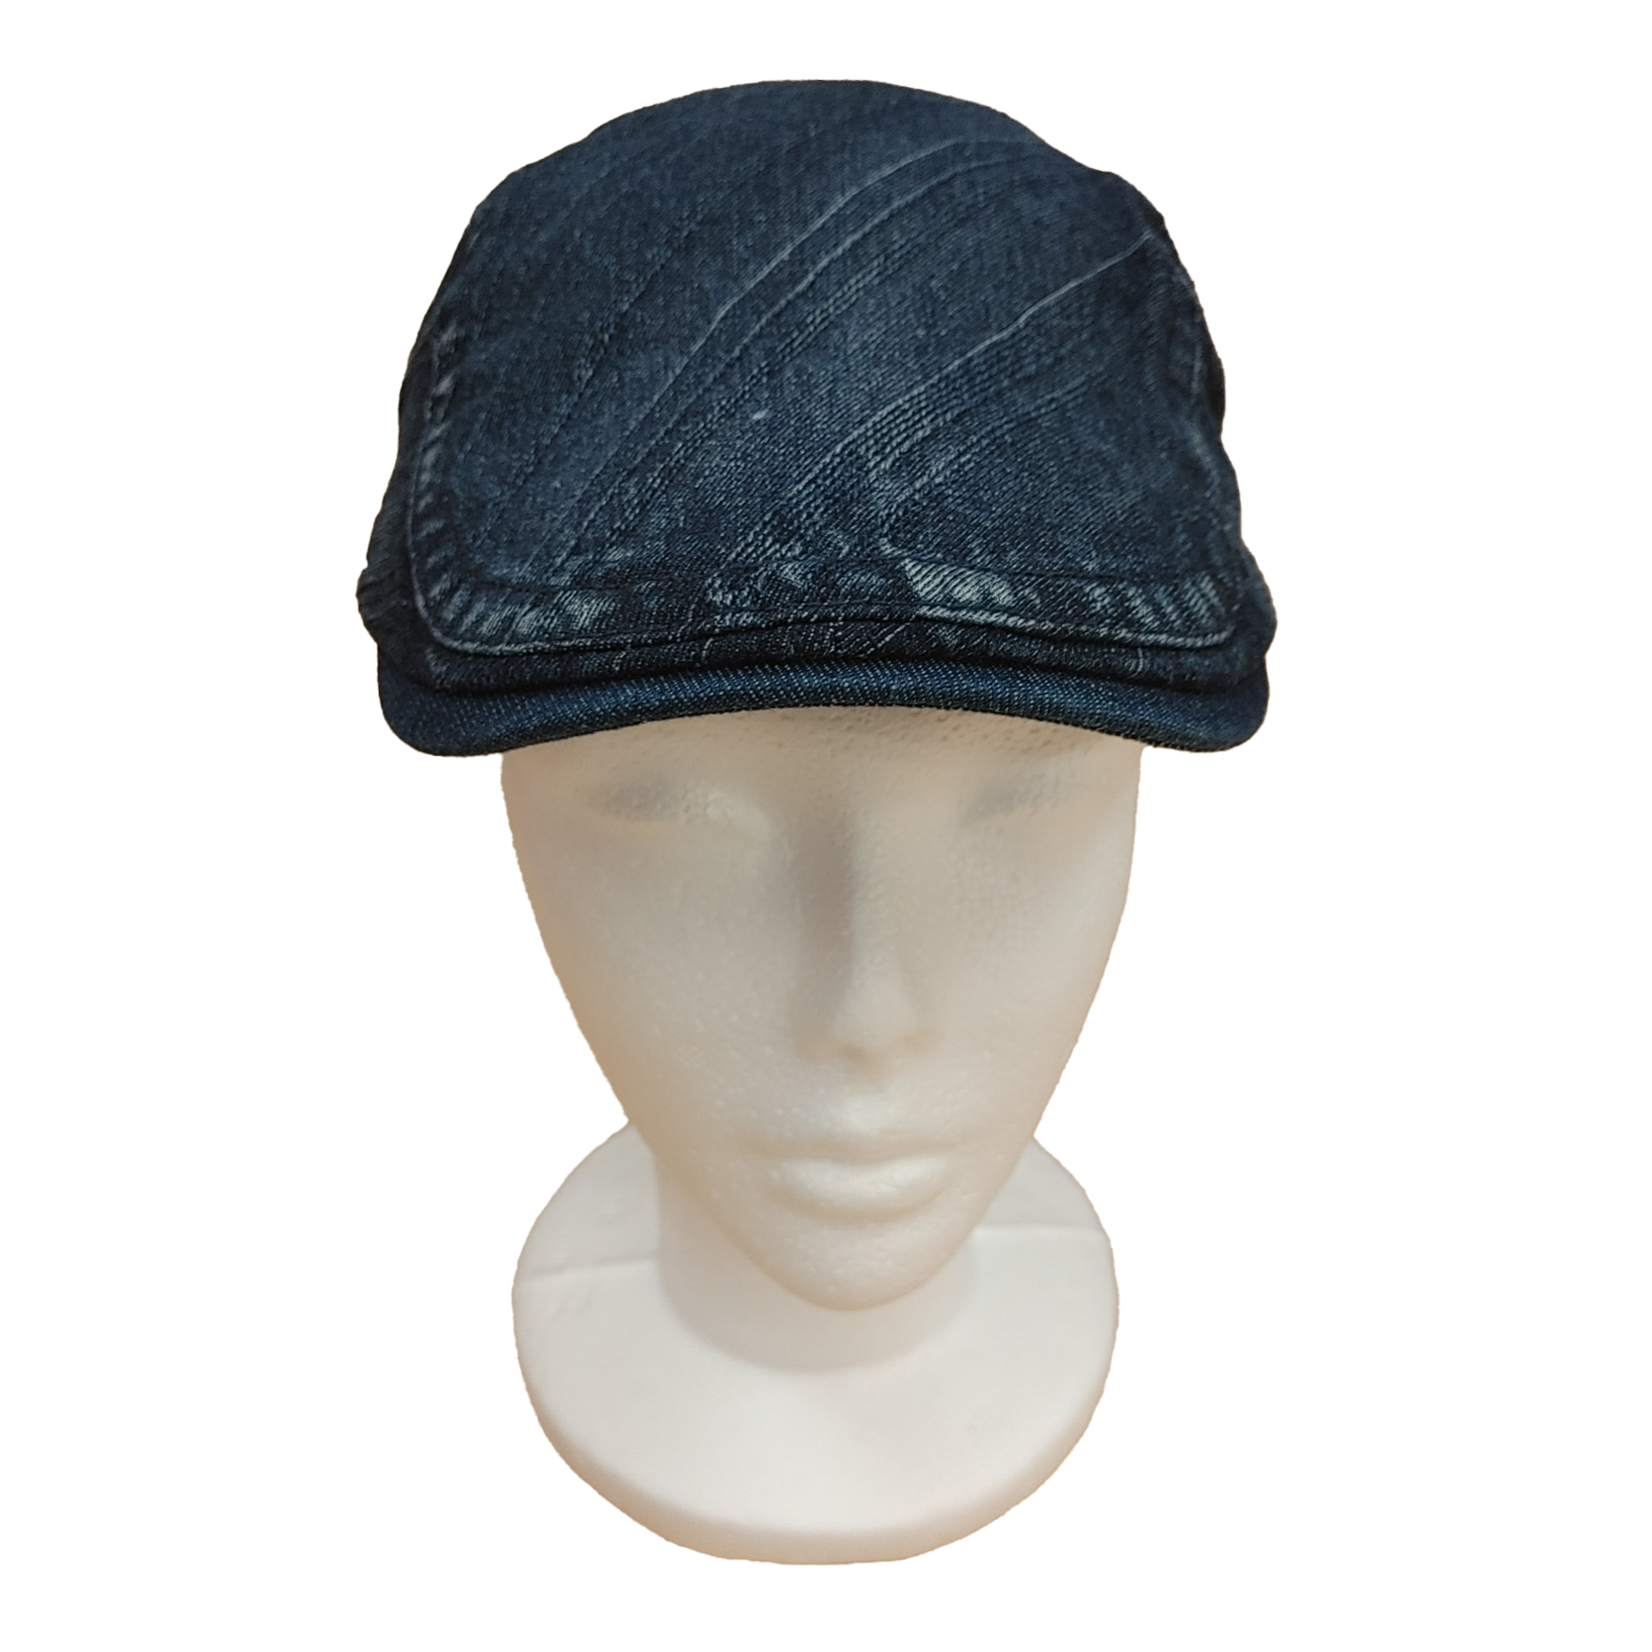 Picabo Picabo denim driving hat